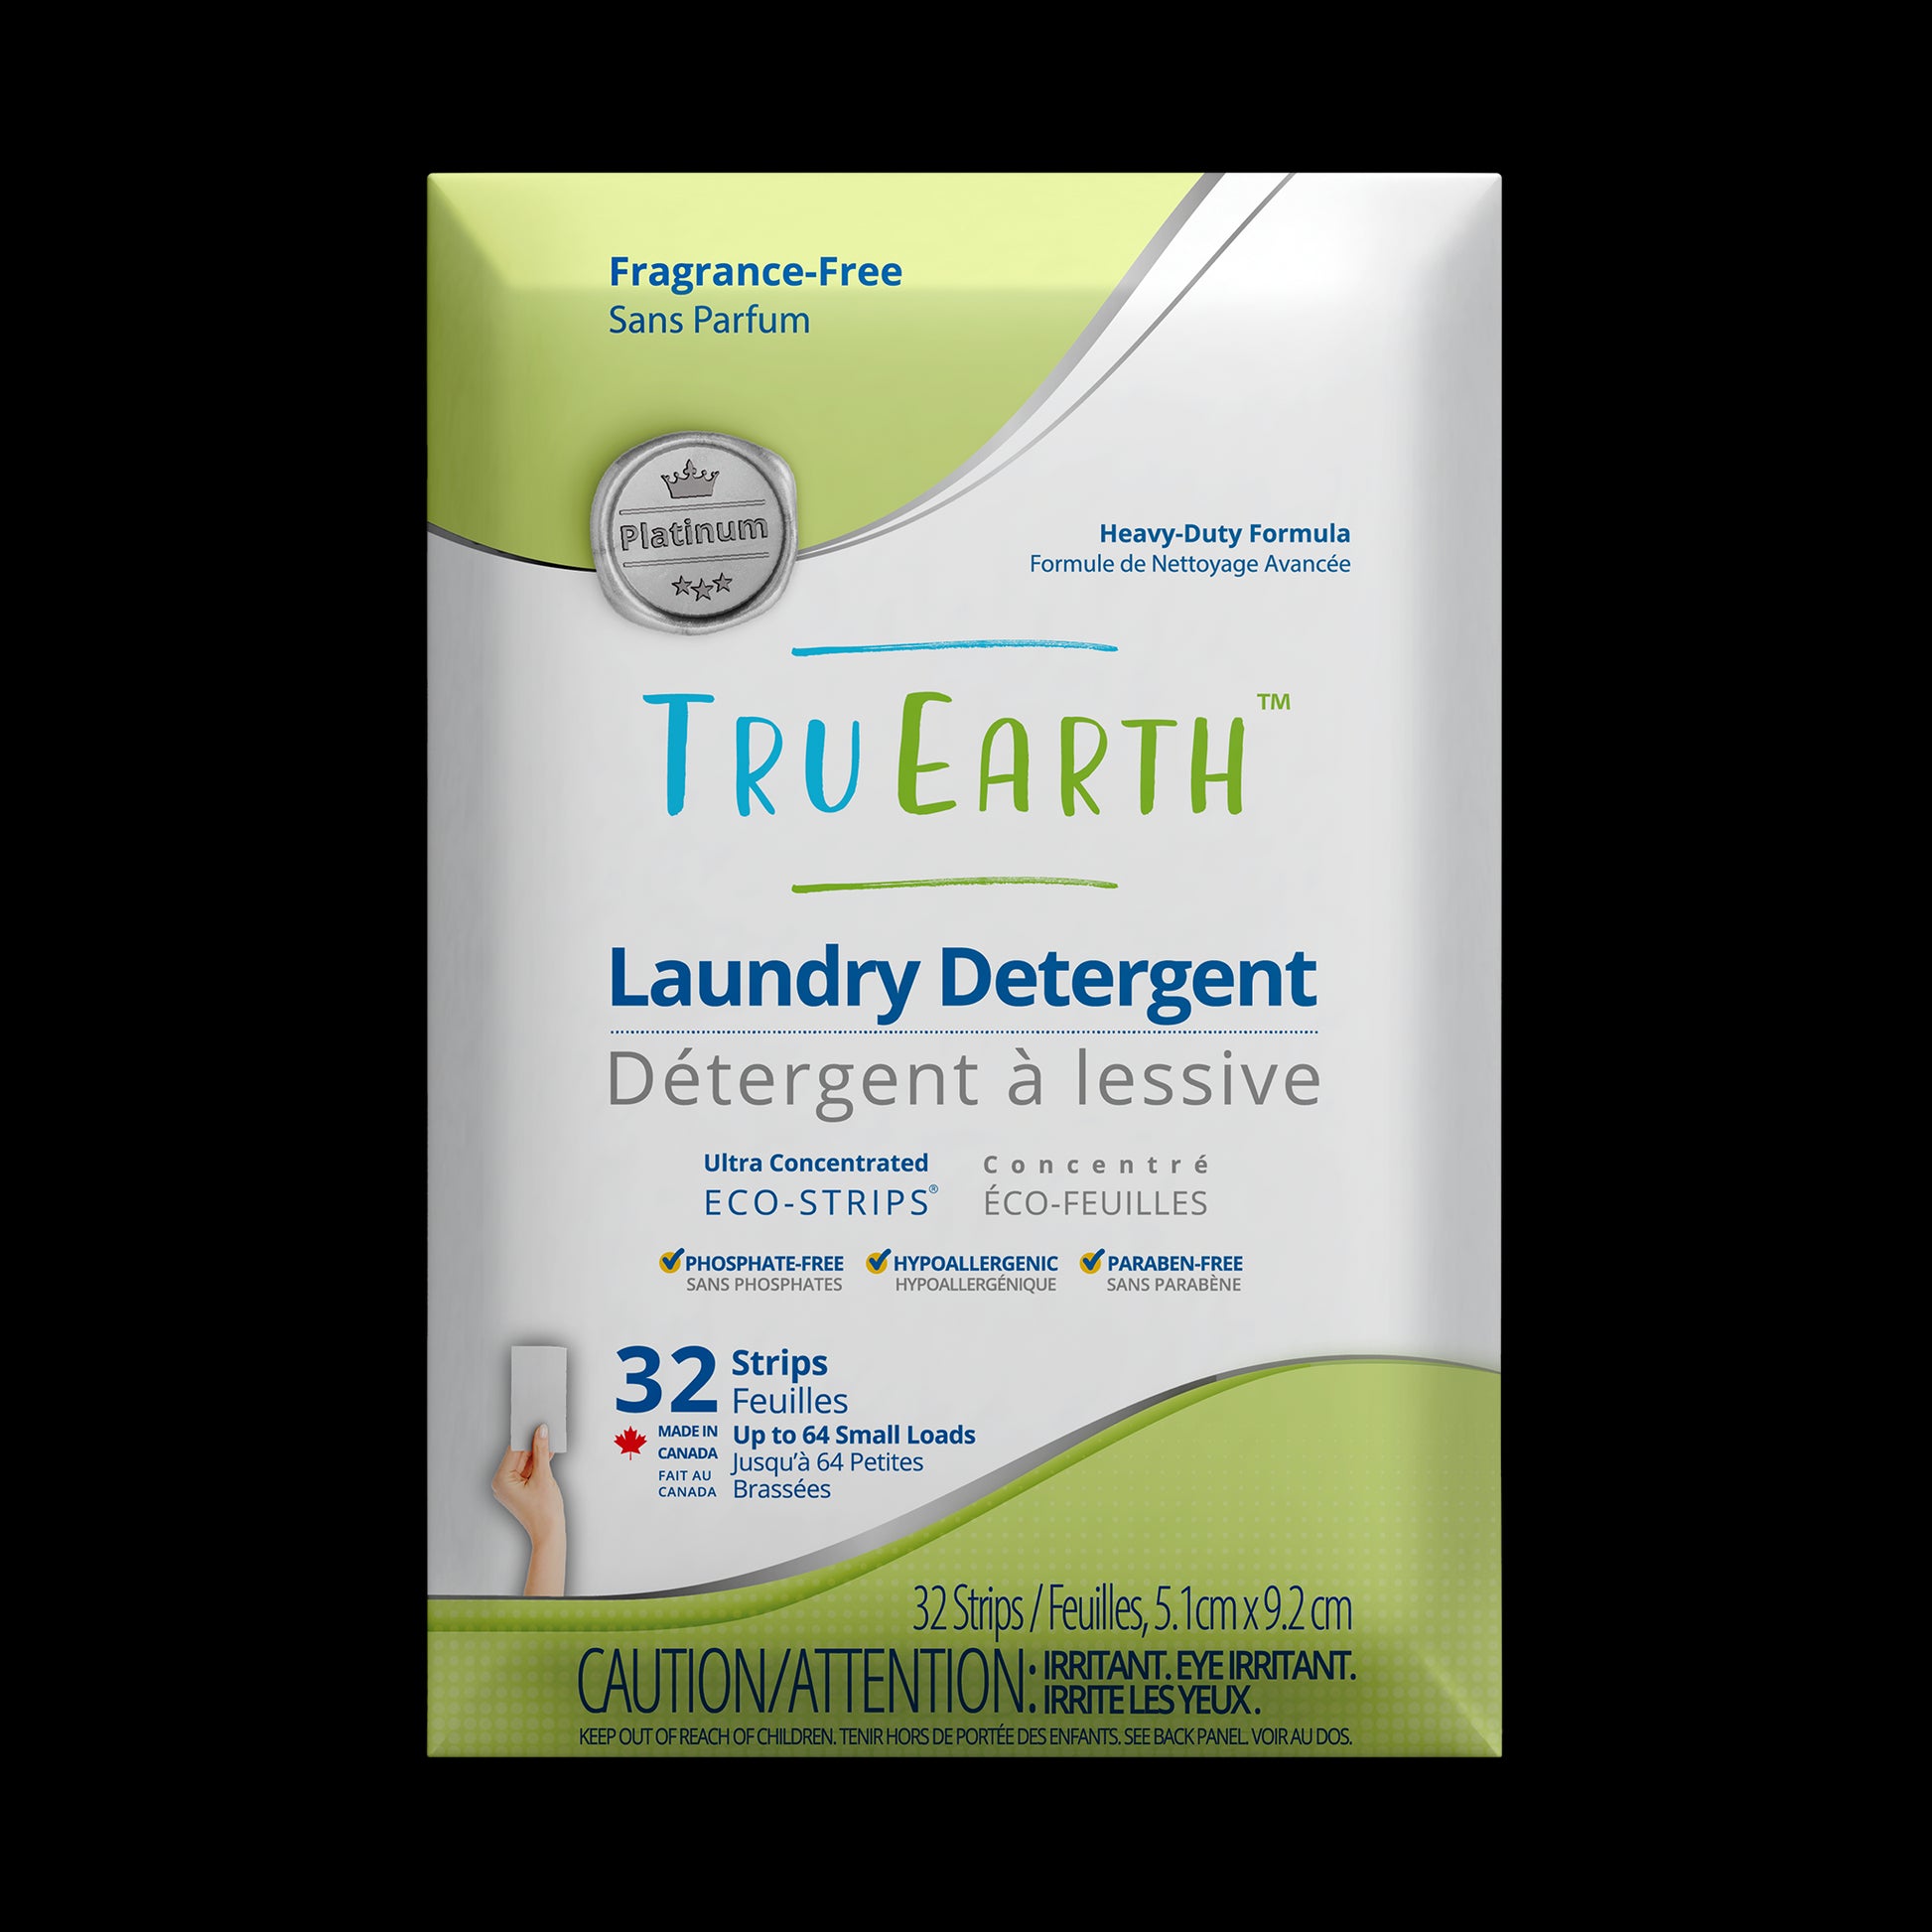 TruEarth Platinum Laundry Detergent Fragrance-Free Front of Package